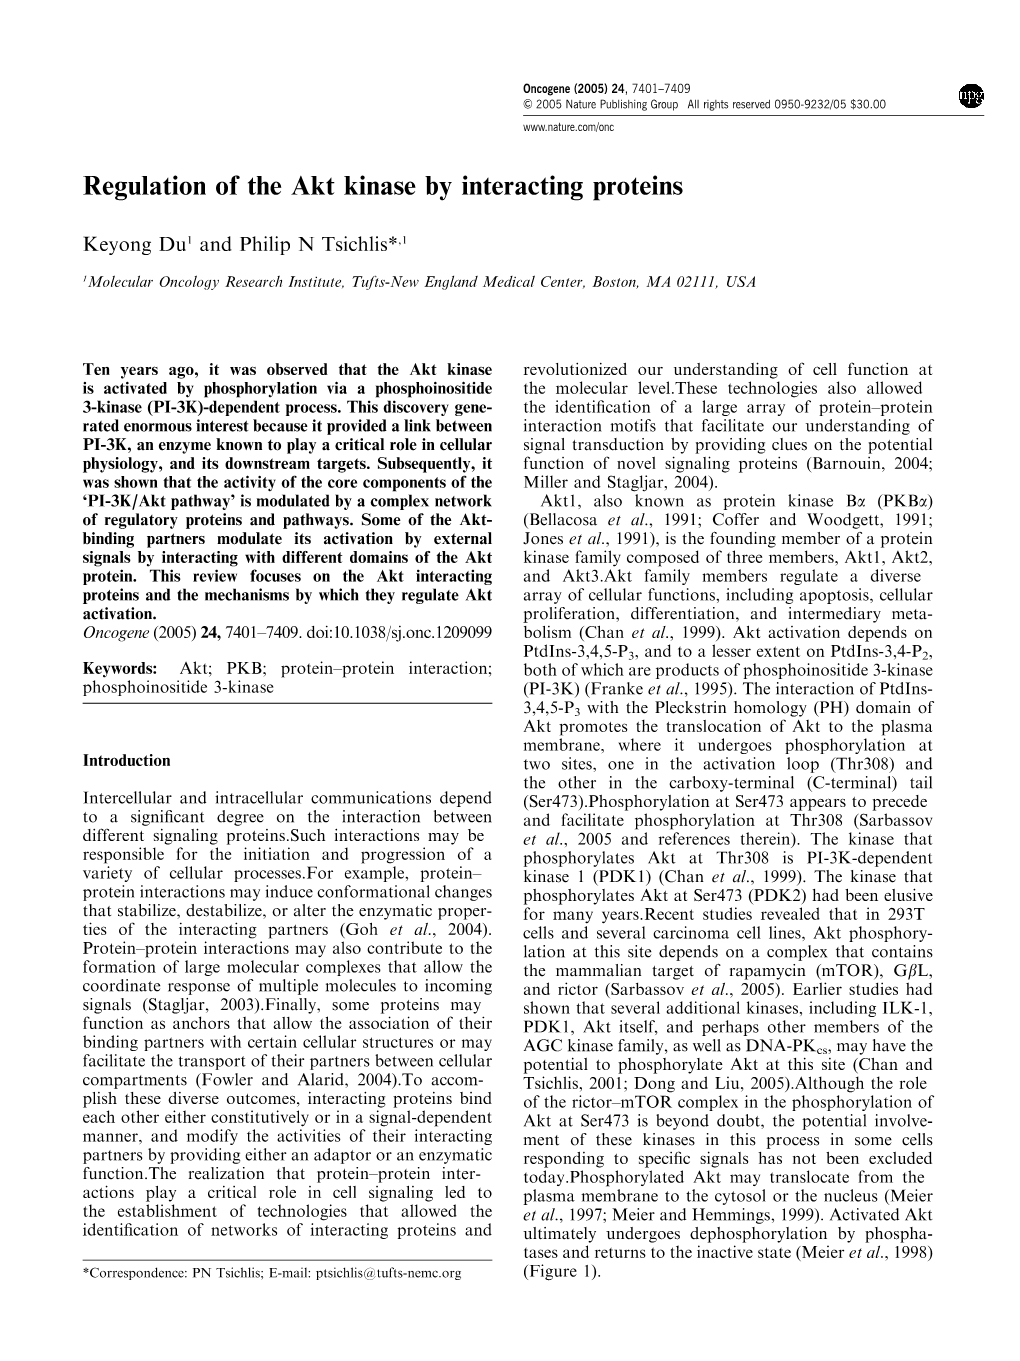 Regulation of the Akt Kinase by Interacting Proteins